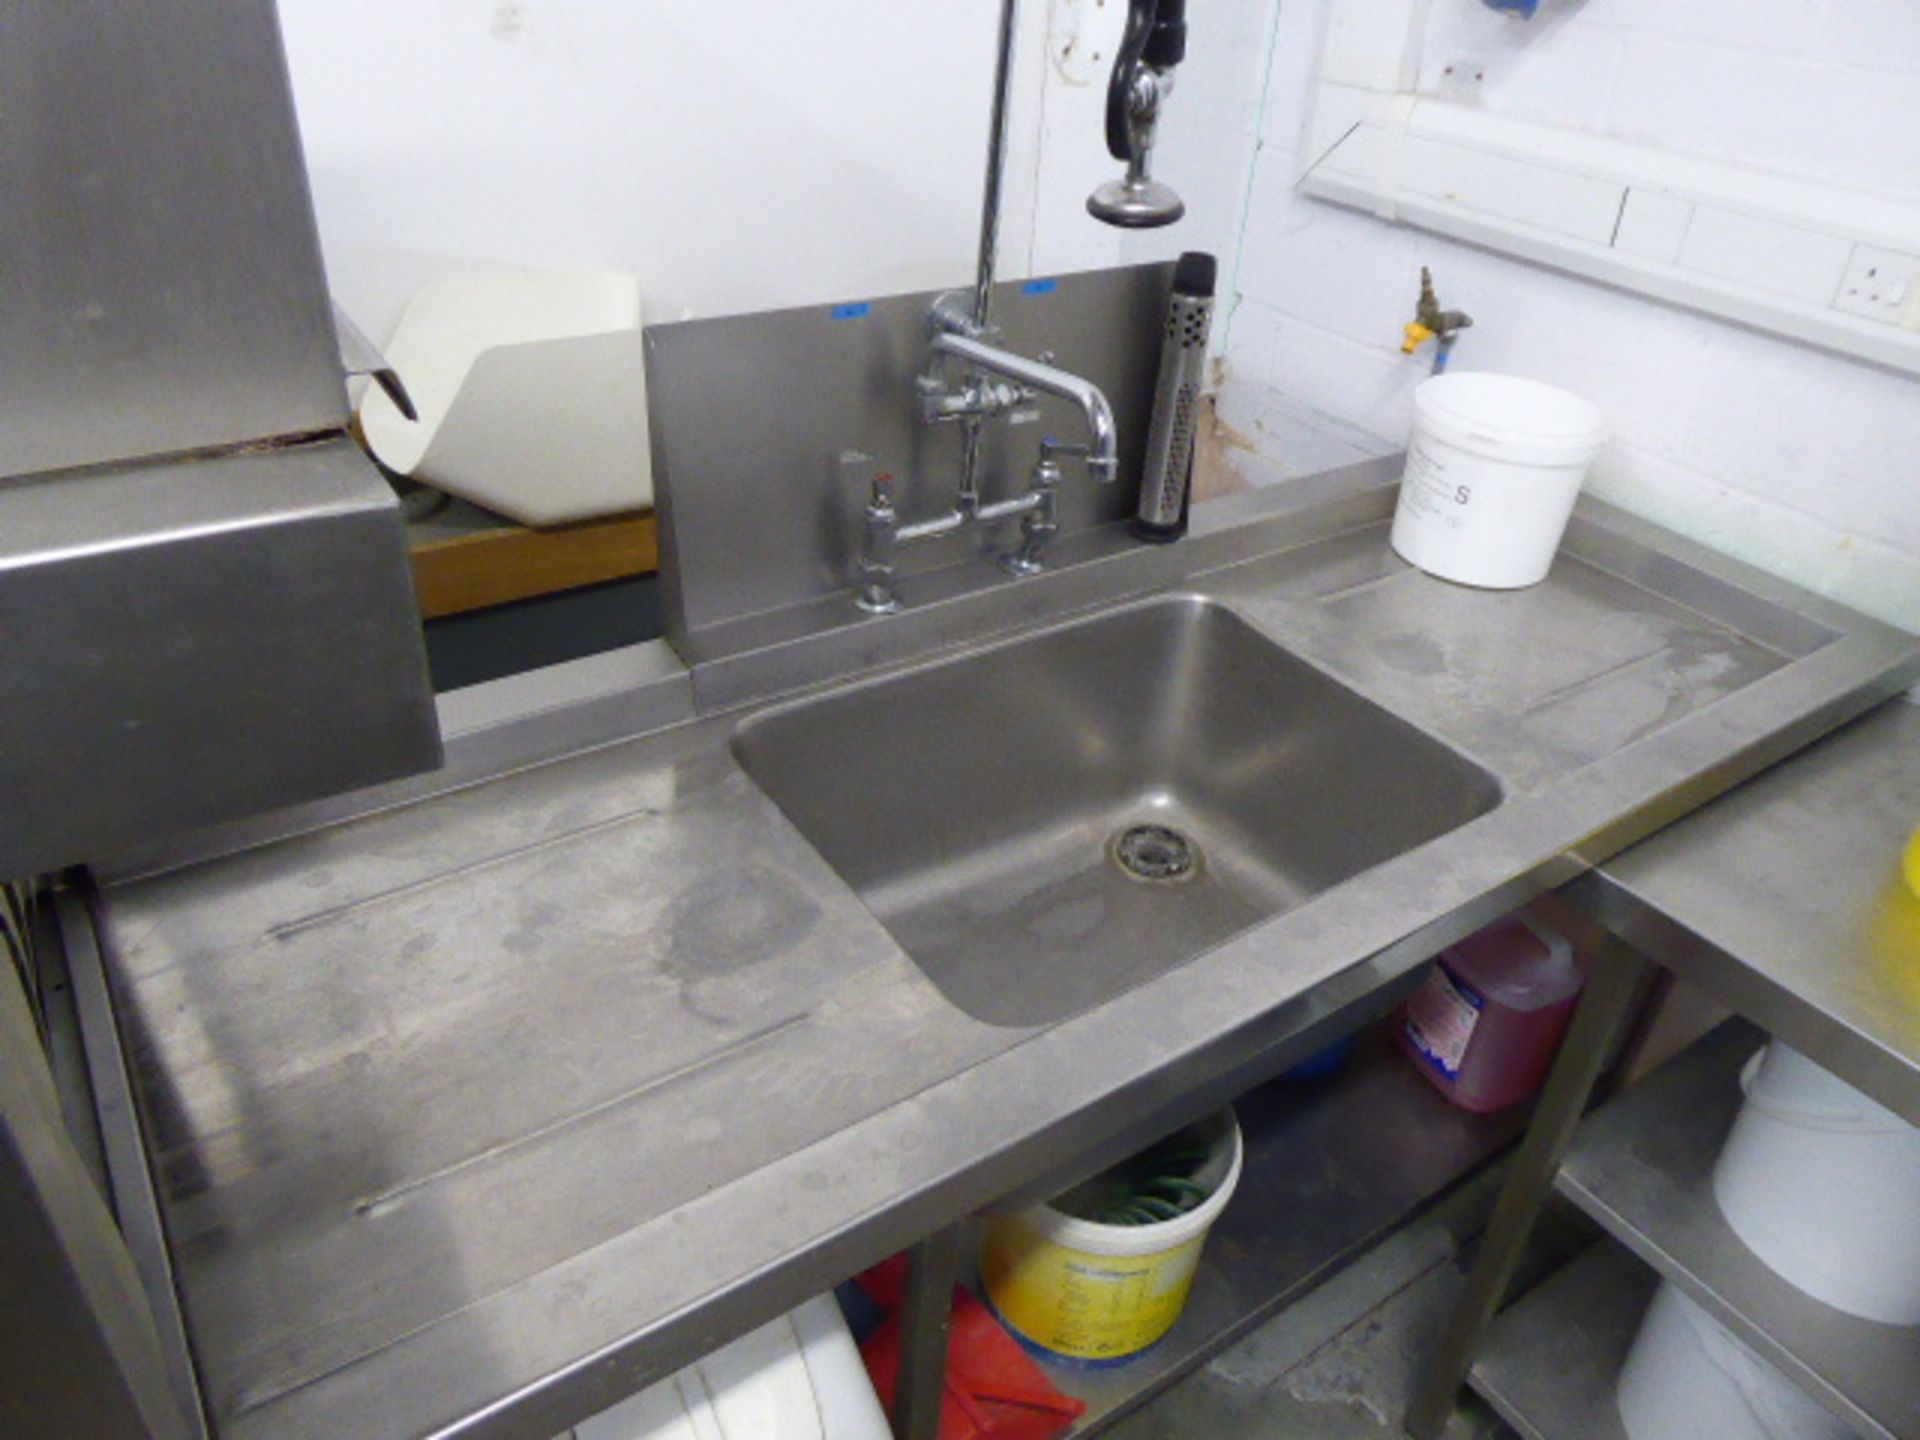 Comenda model ACR 205 flight deck dishwasher, 3 phase with associated single bowl pre rinse - Image 7 of 11